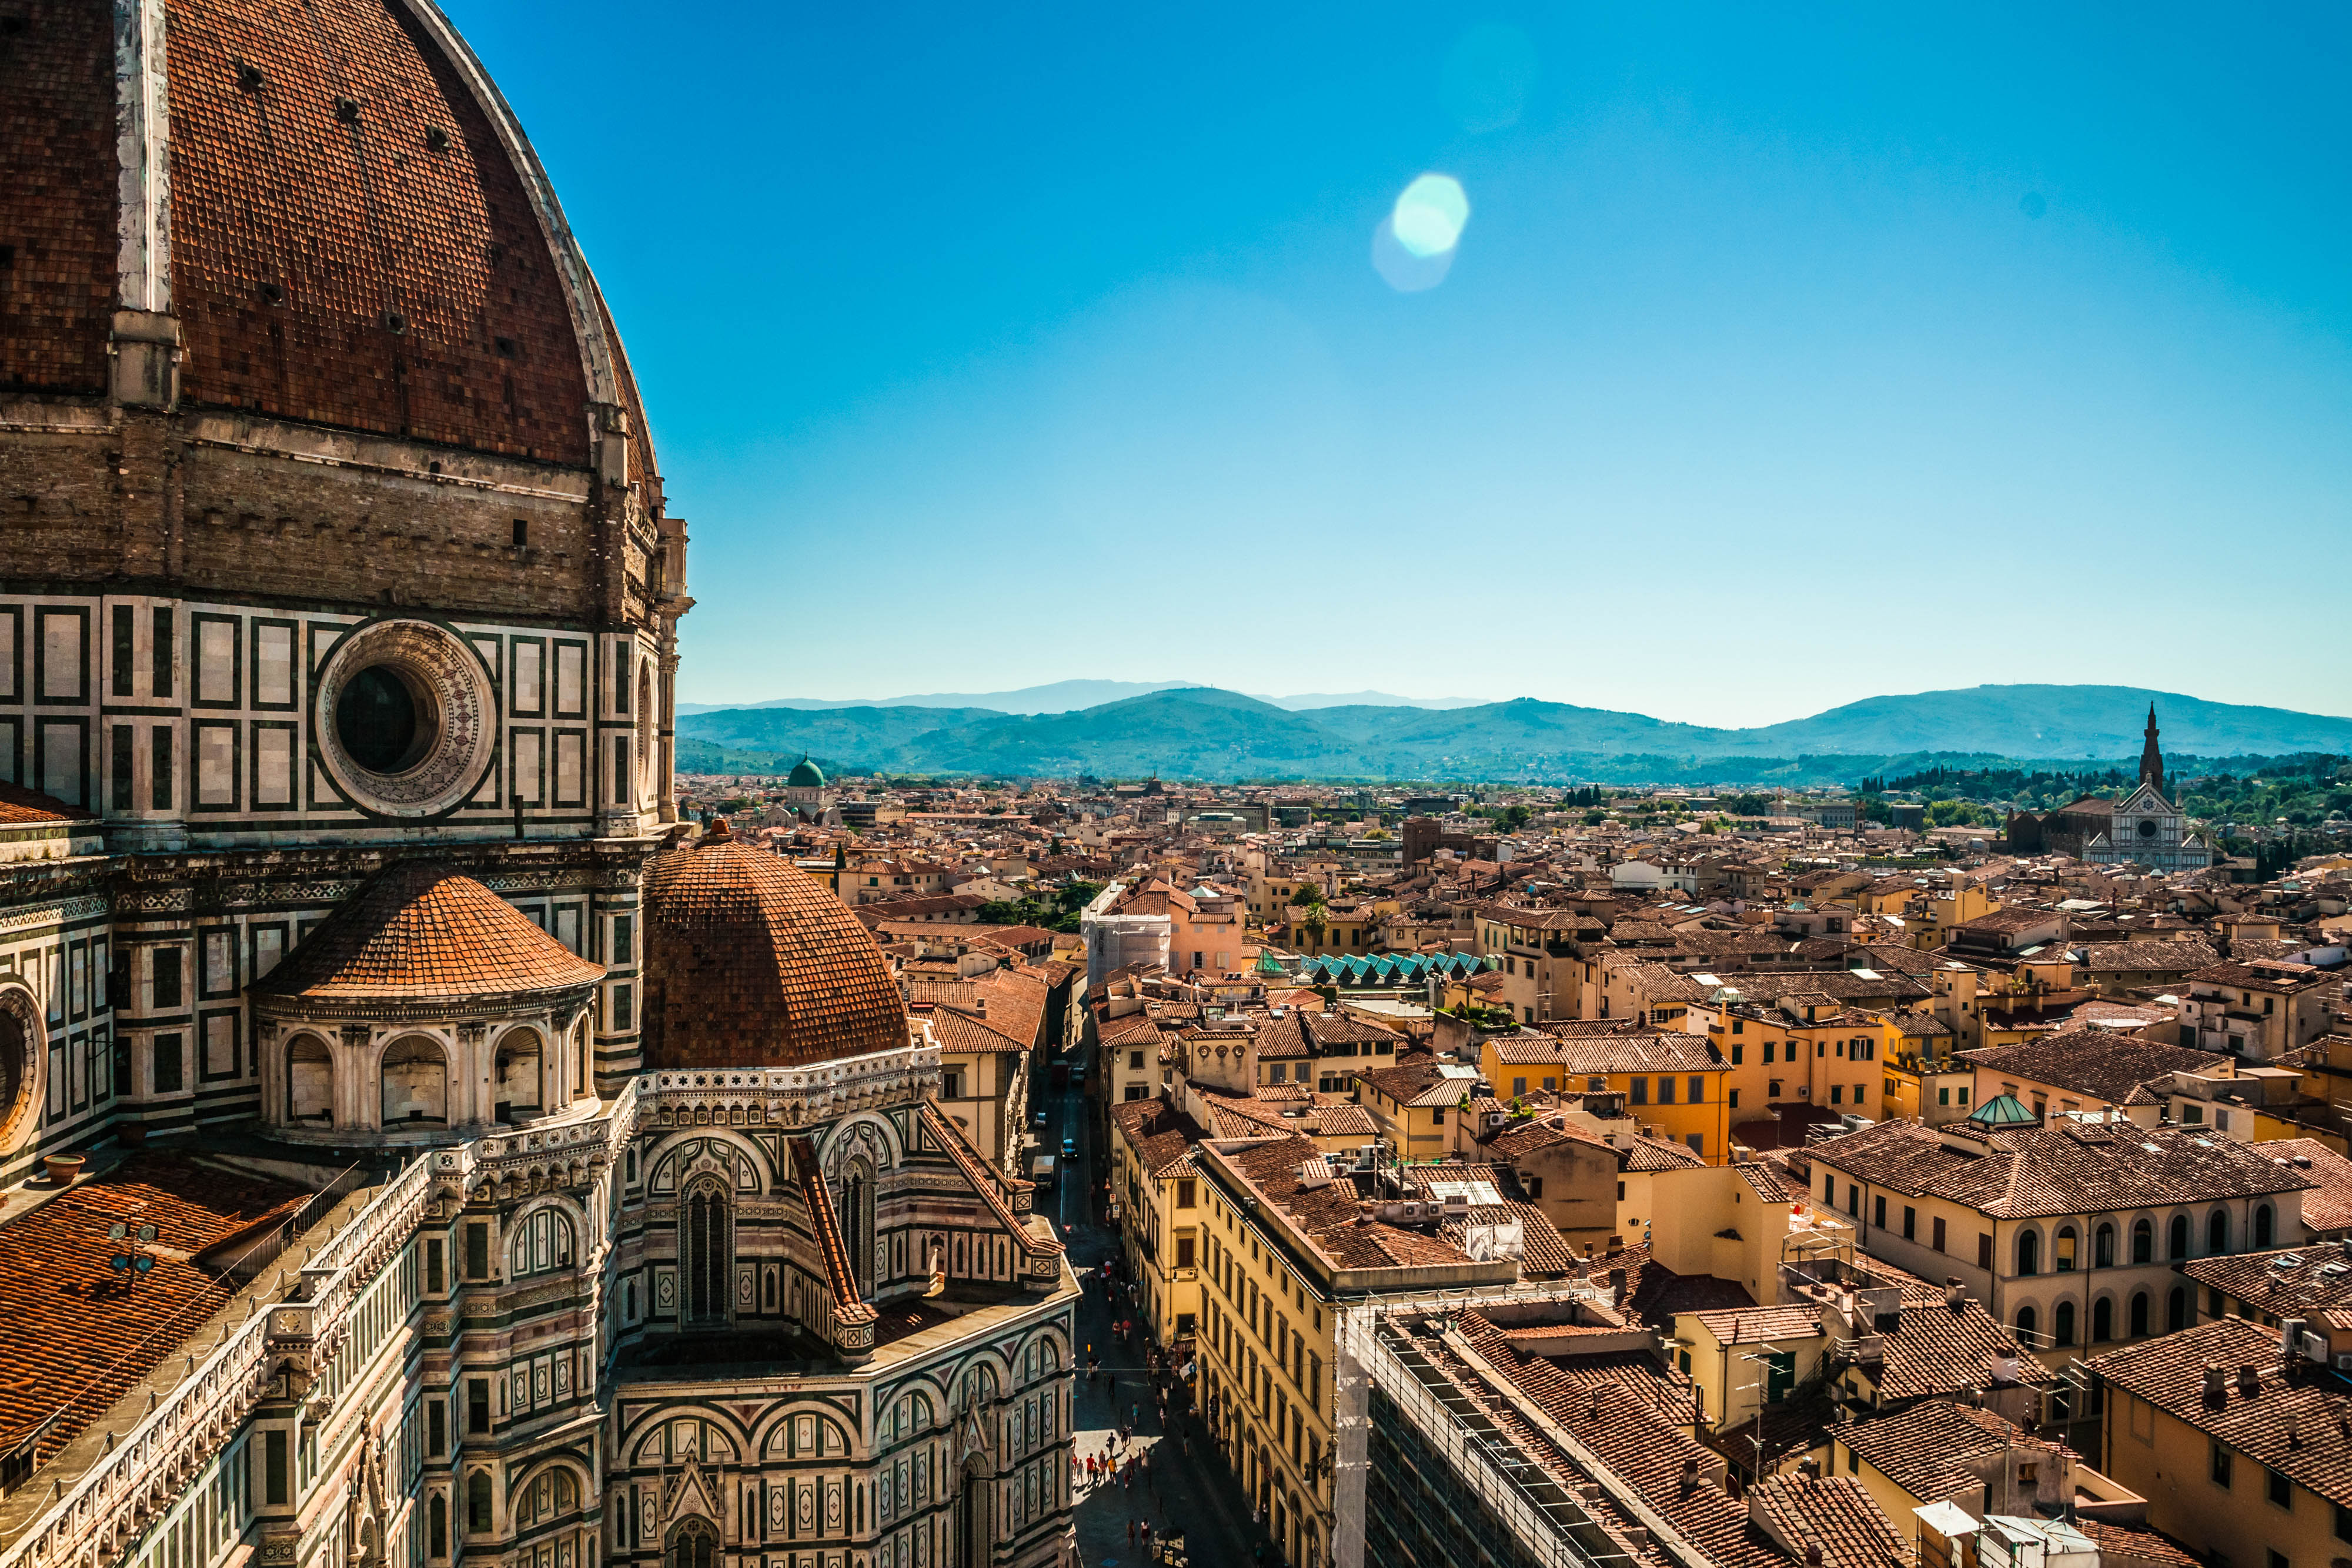 The Basilica di Santa Maria del Fiore (Basilica of Saint Mary of the Flower) in Florence, Italy